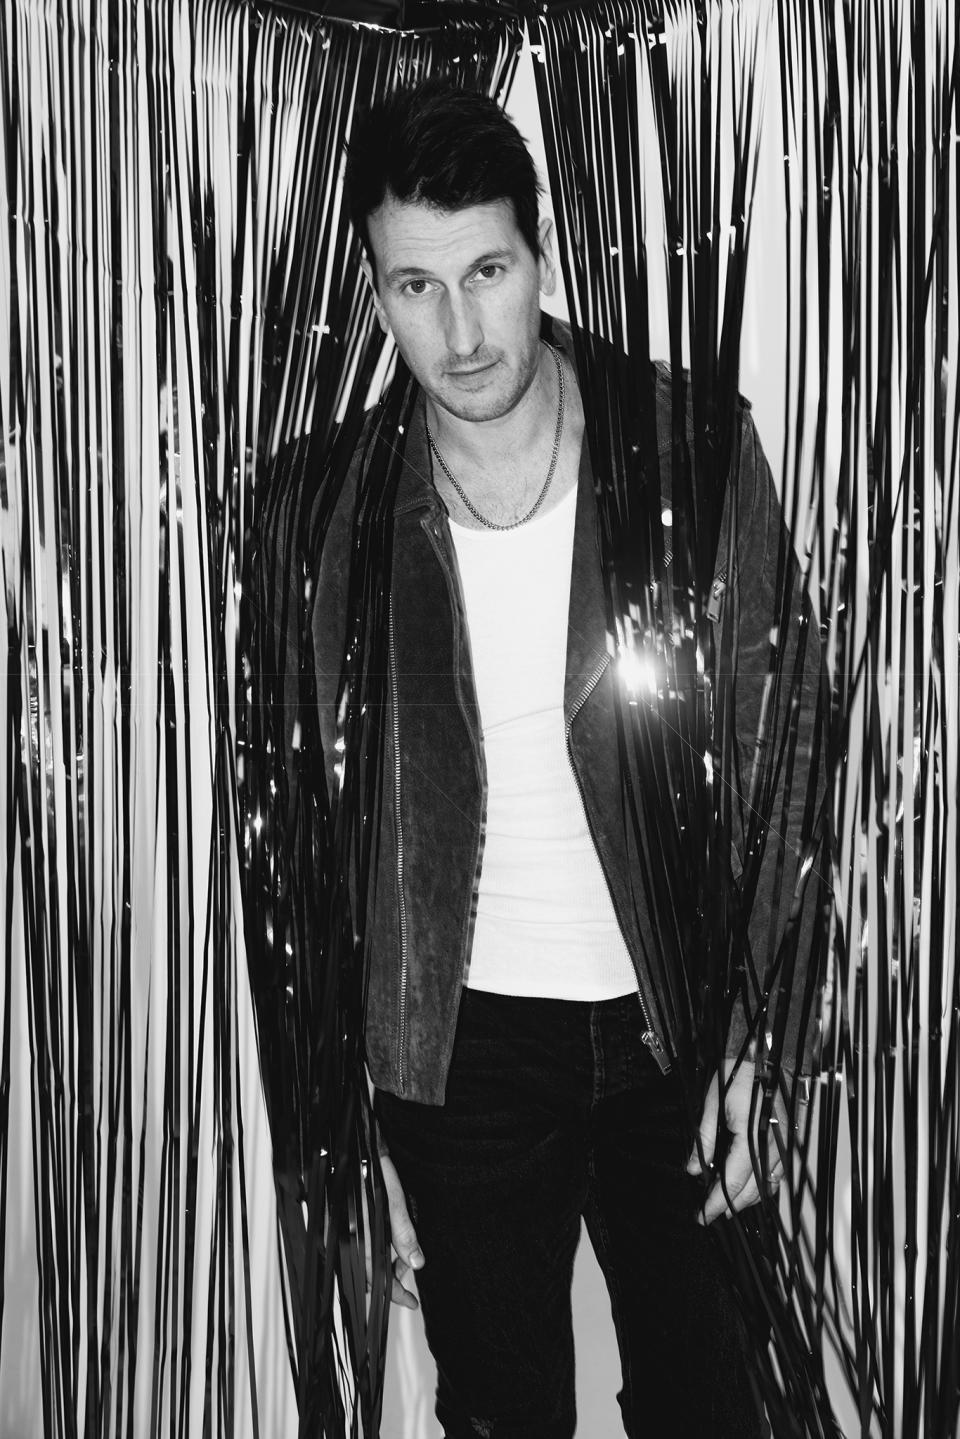 Russell Dickerson - Credit: Lexie Moreland/WWD